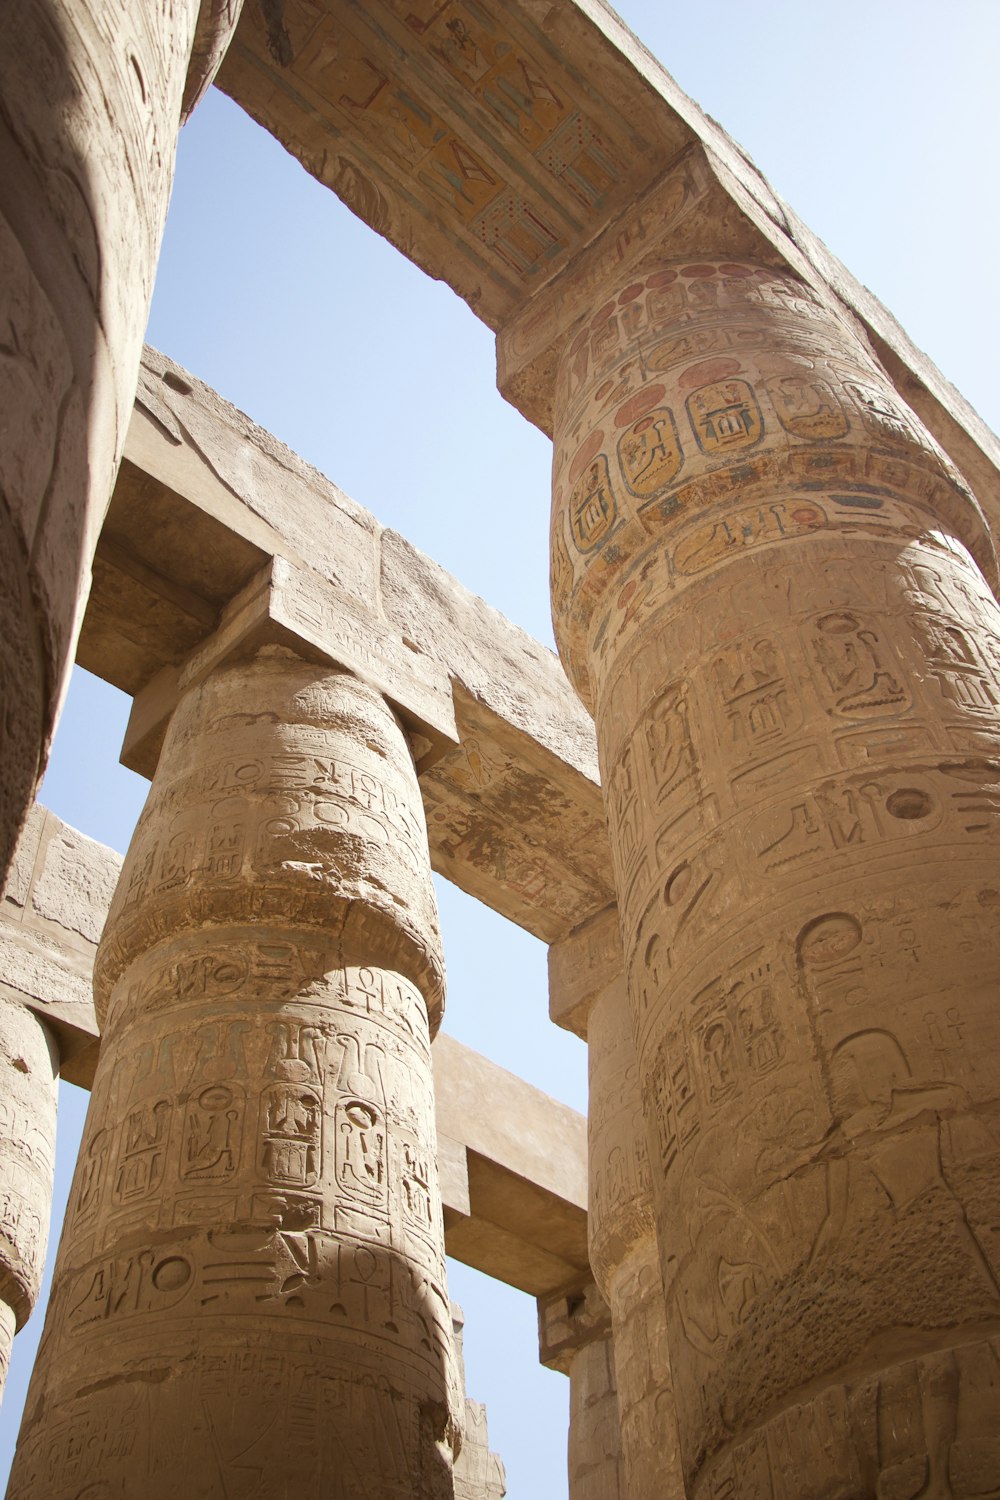 the columns of the temple are decorated with egyptian writing